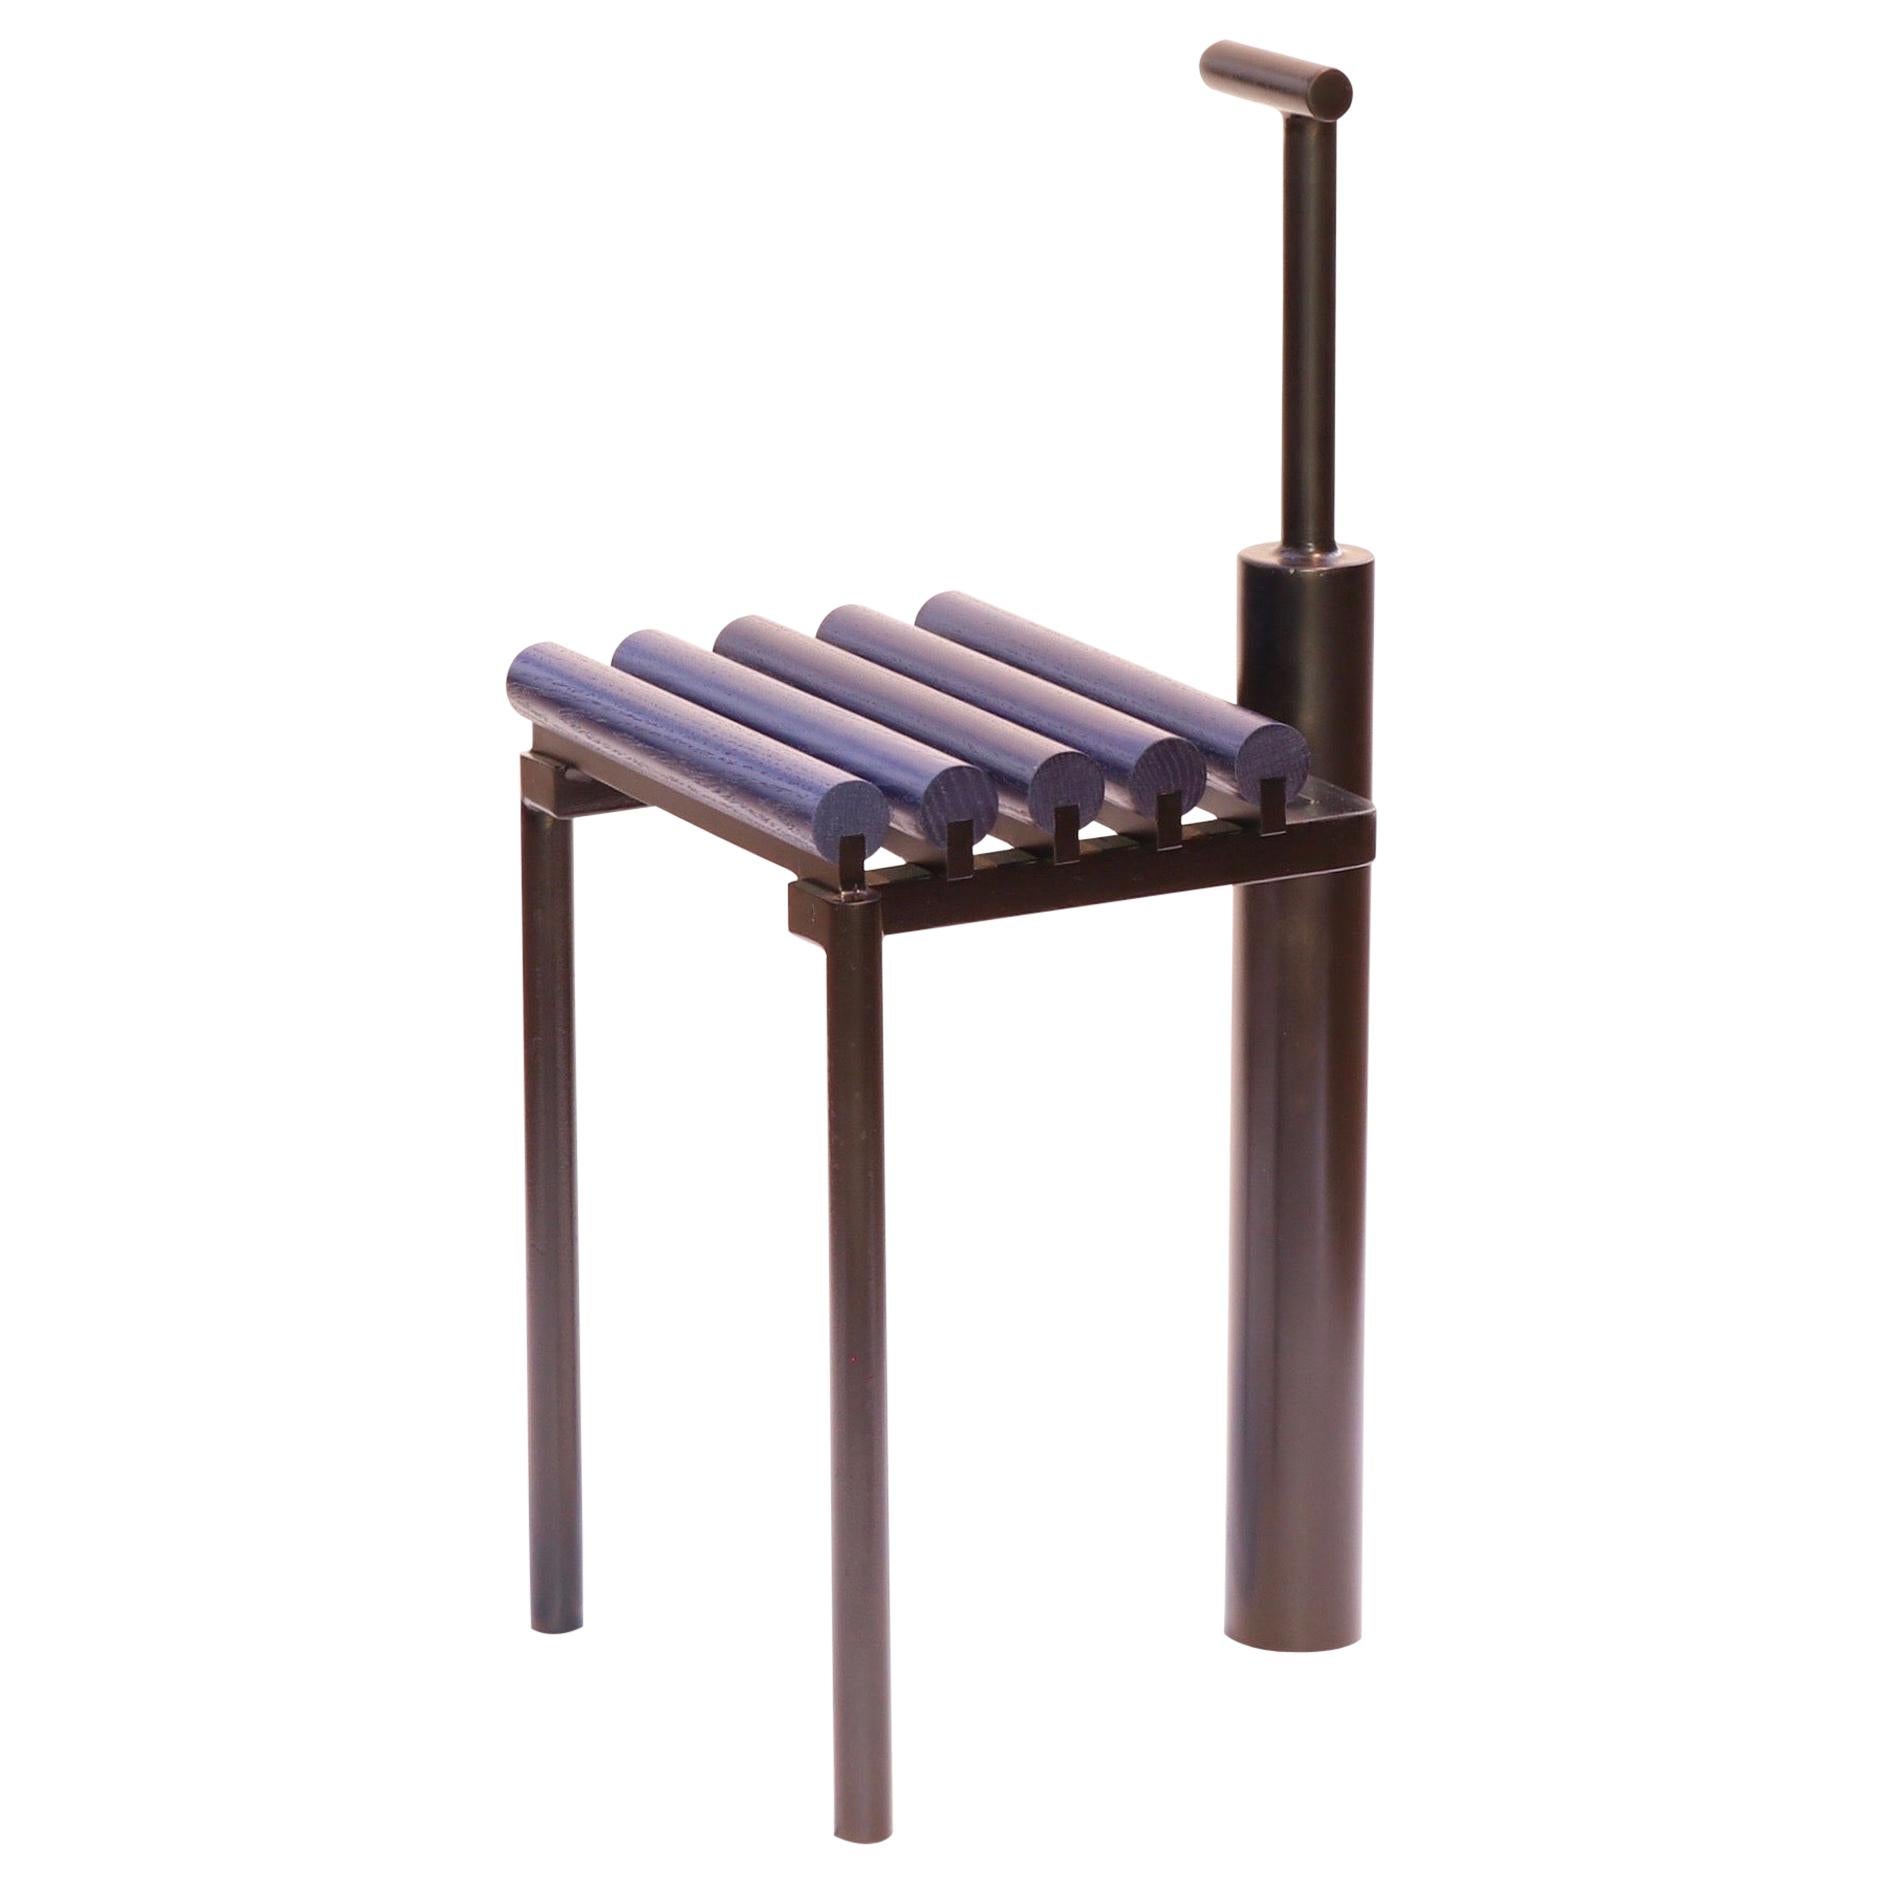 Chair 9, Sculptural Chair in Steel and Oak, Metallic Blue and Black Painted For Sale